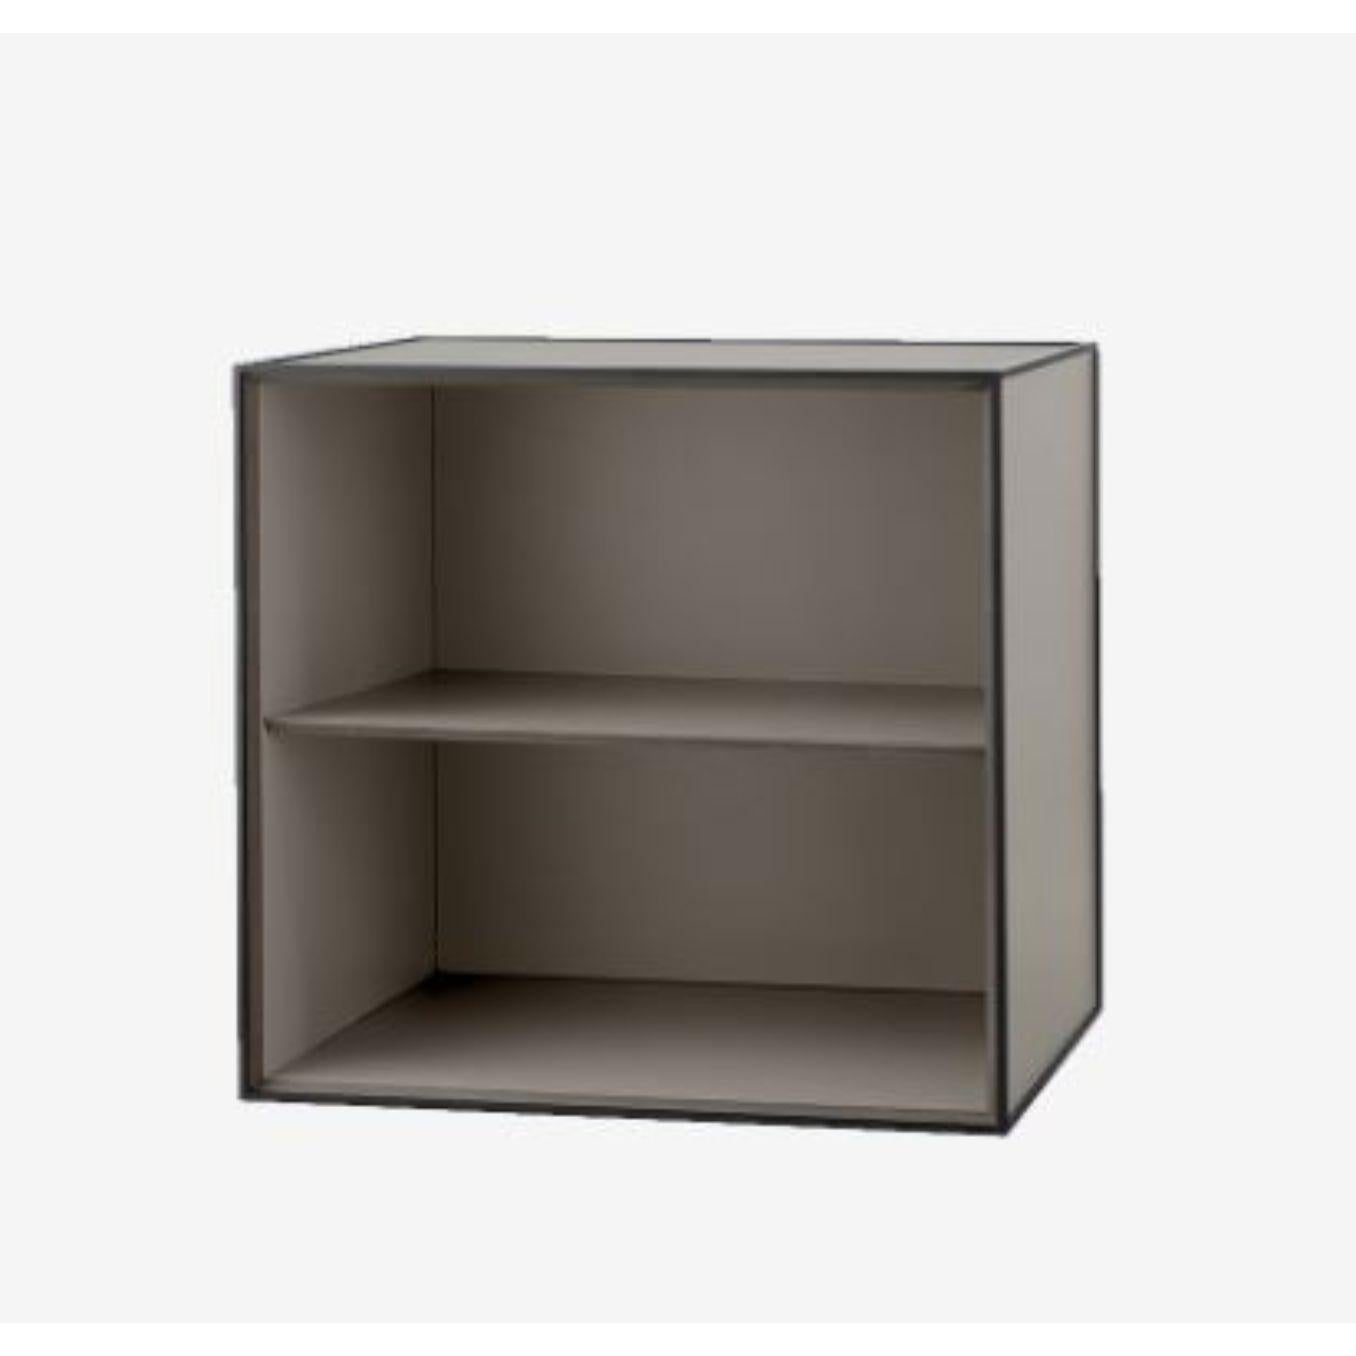 49 sand frame box with shelf by Lassen
Dimensions: D 49 x W 42 x H 49 cm 
Materials: Finér, Melamin, Melamin, Melamine, Metal, Veneer
Also available in different colors and dimensions. 
Weight: 14 Kg


By Lassen is a Danish design brand